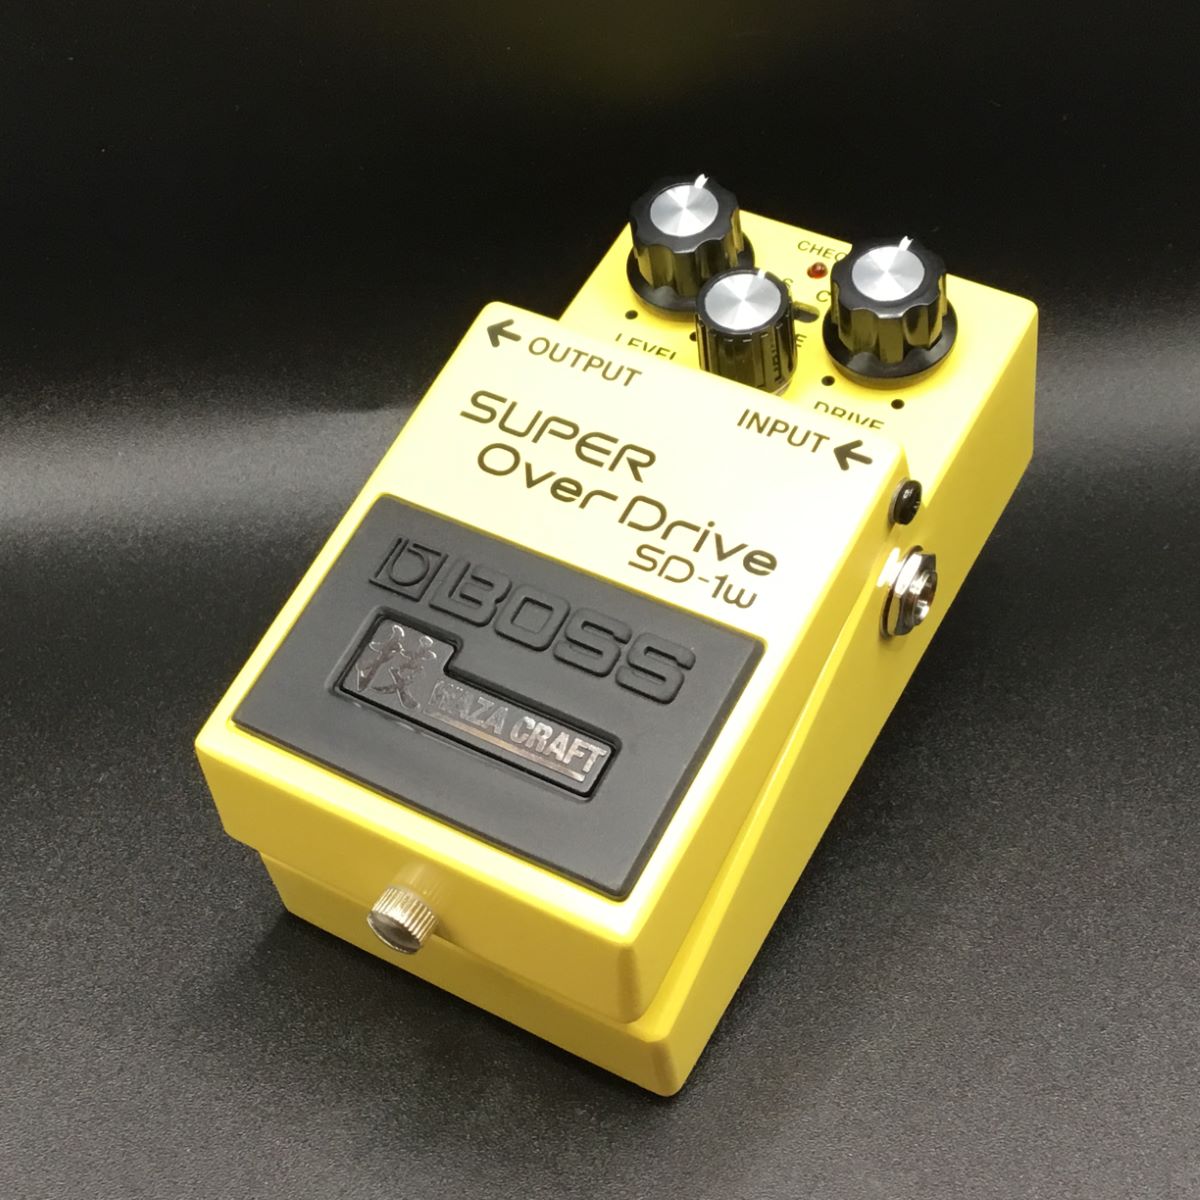 BOSS SD-1W waza craft MADE IN JAPAN